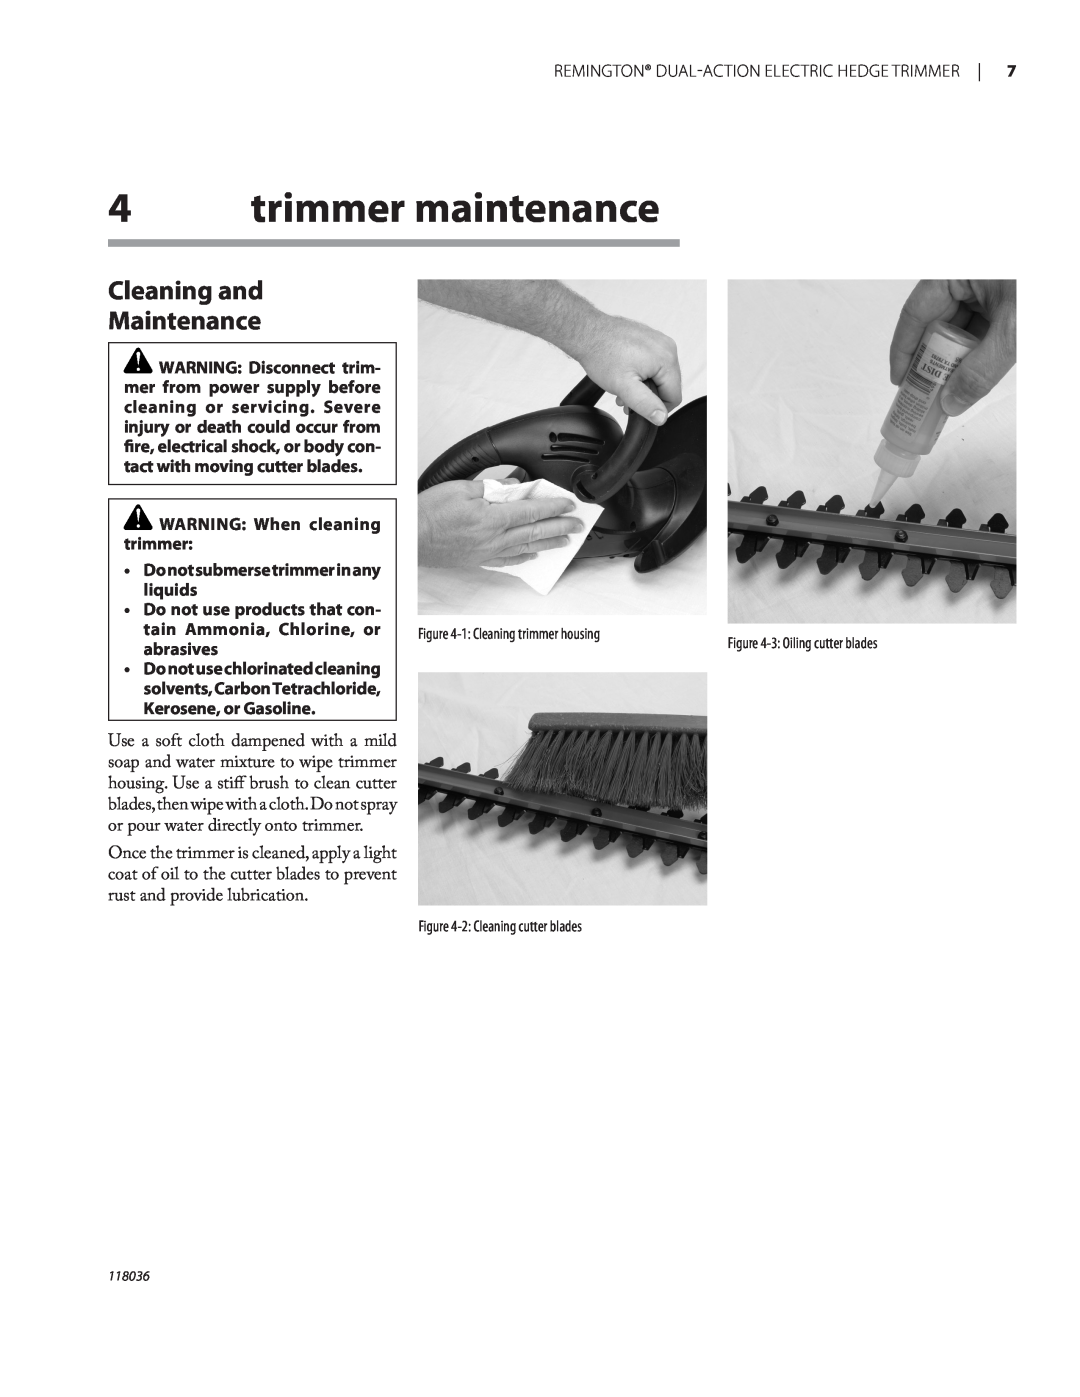 Remington Power Tools HT3218A, HT4022A trimmer maintenance, Cleaning and Maintenance, WARNING: When cleaning trimmer 